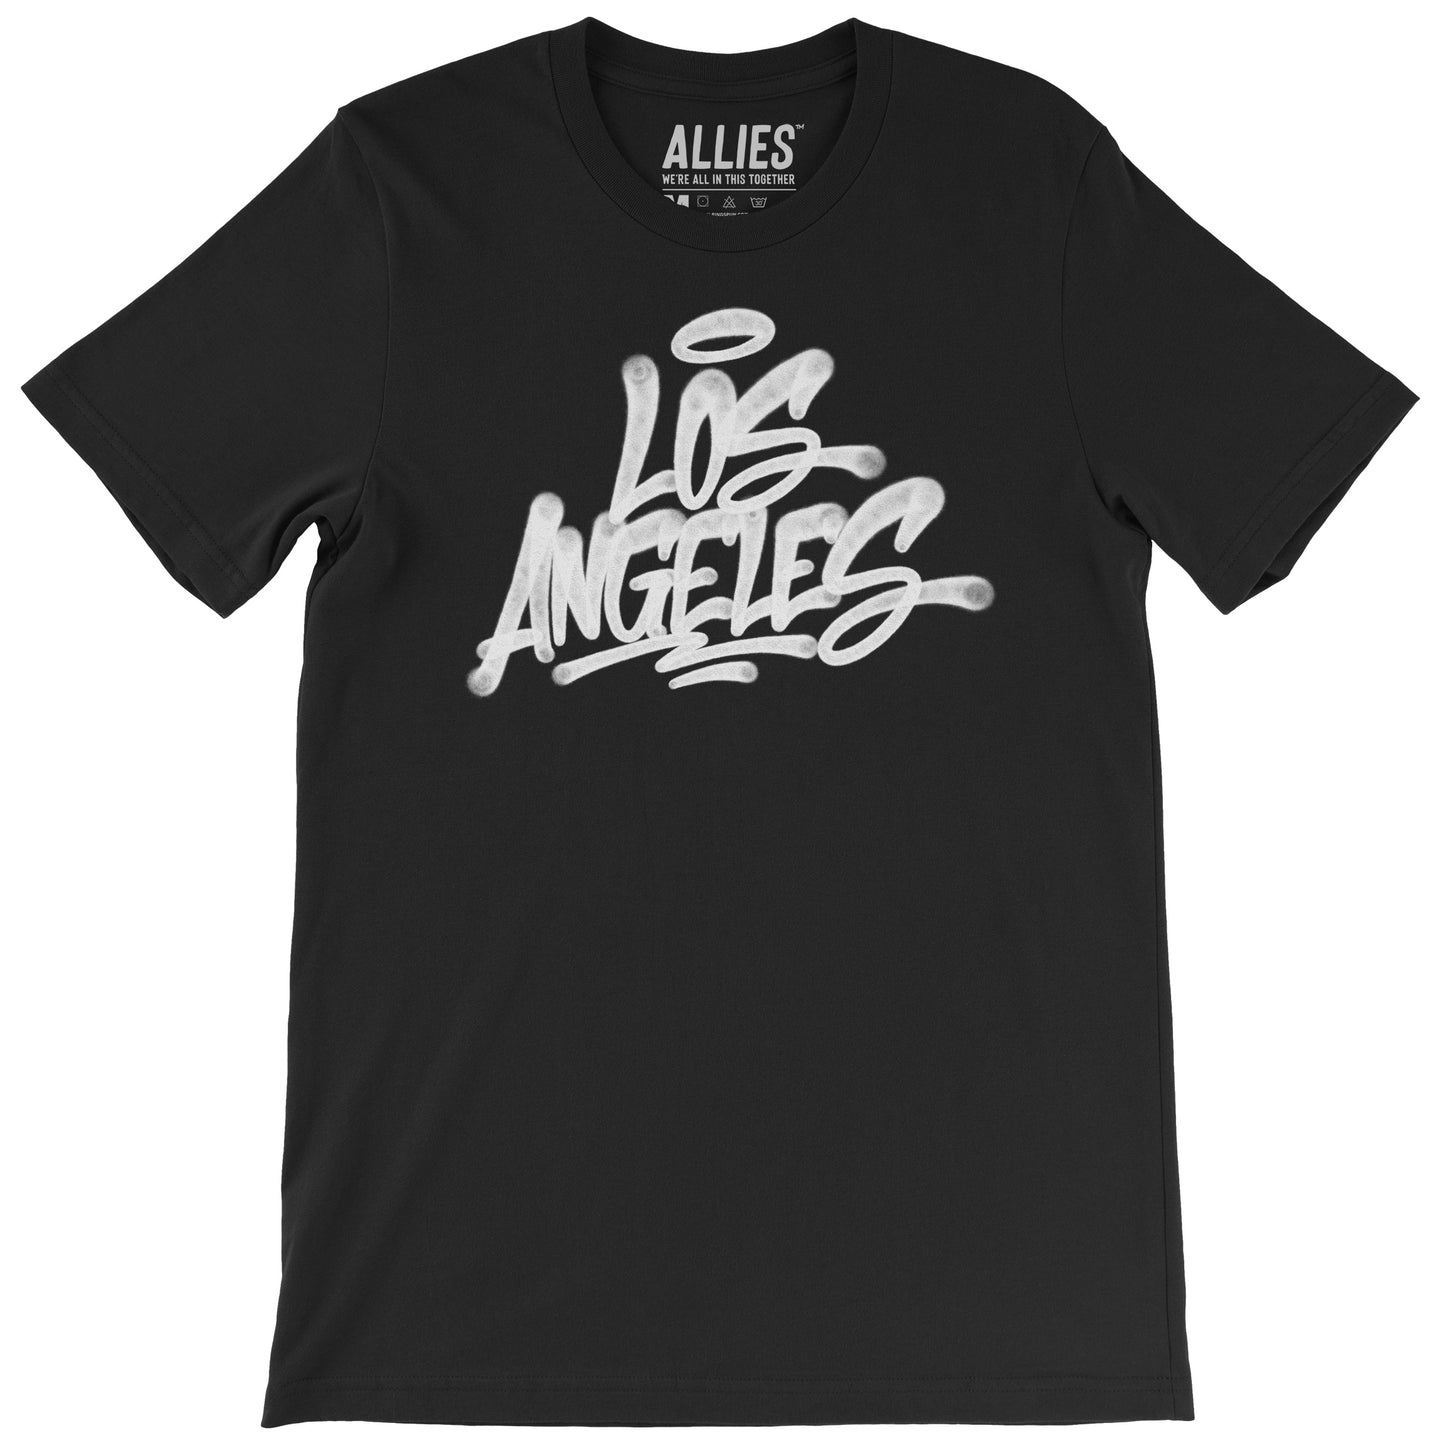 Los Angeles Handstyle T-shirt